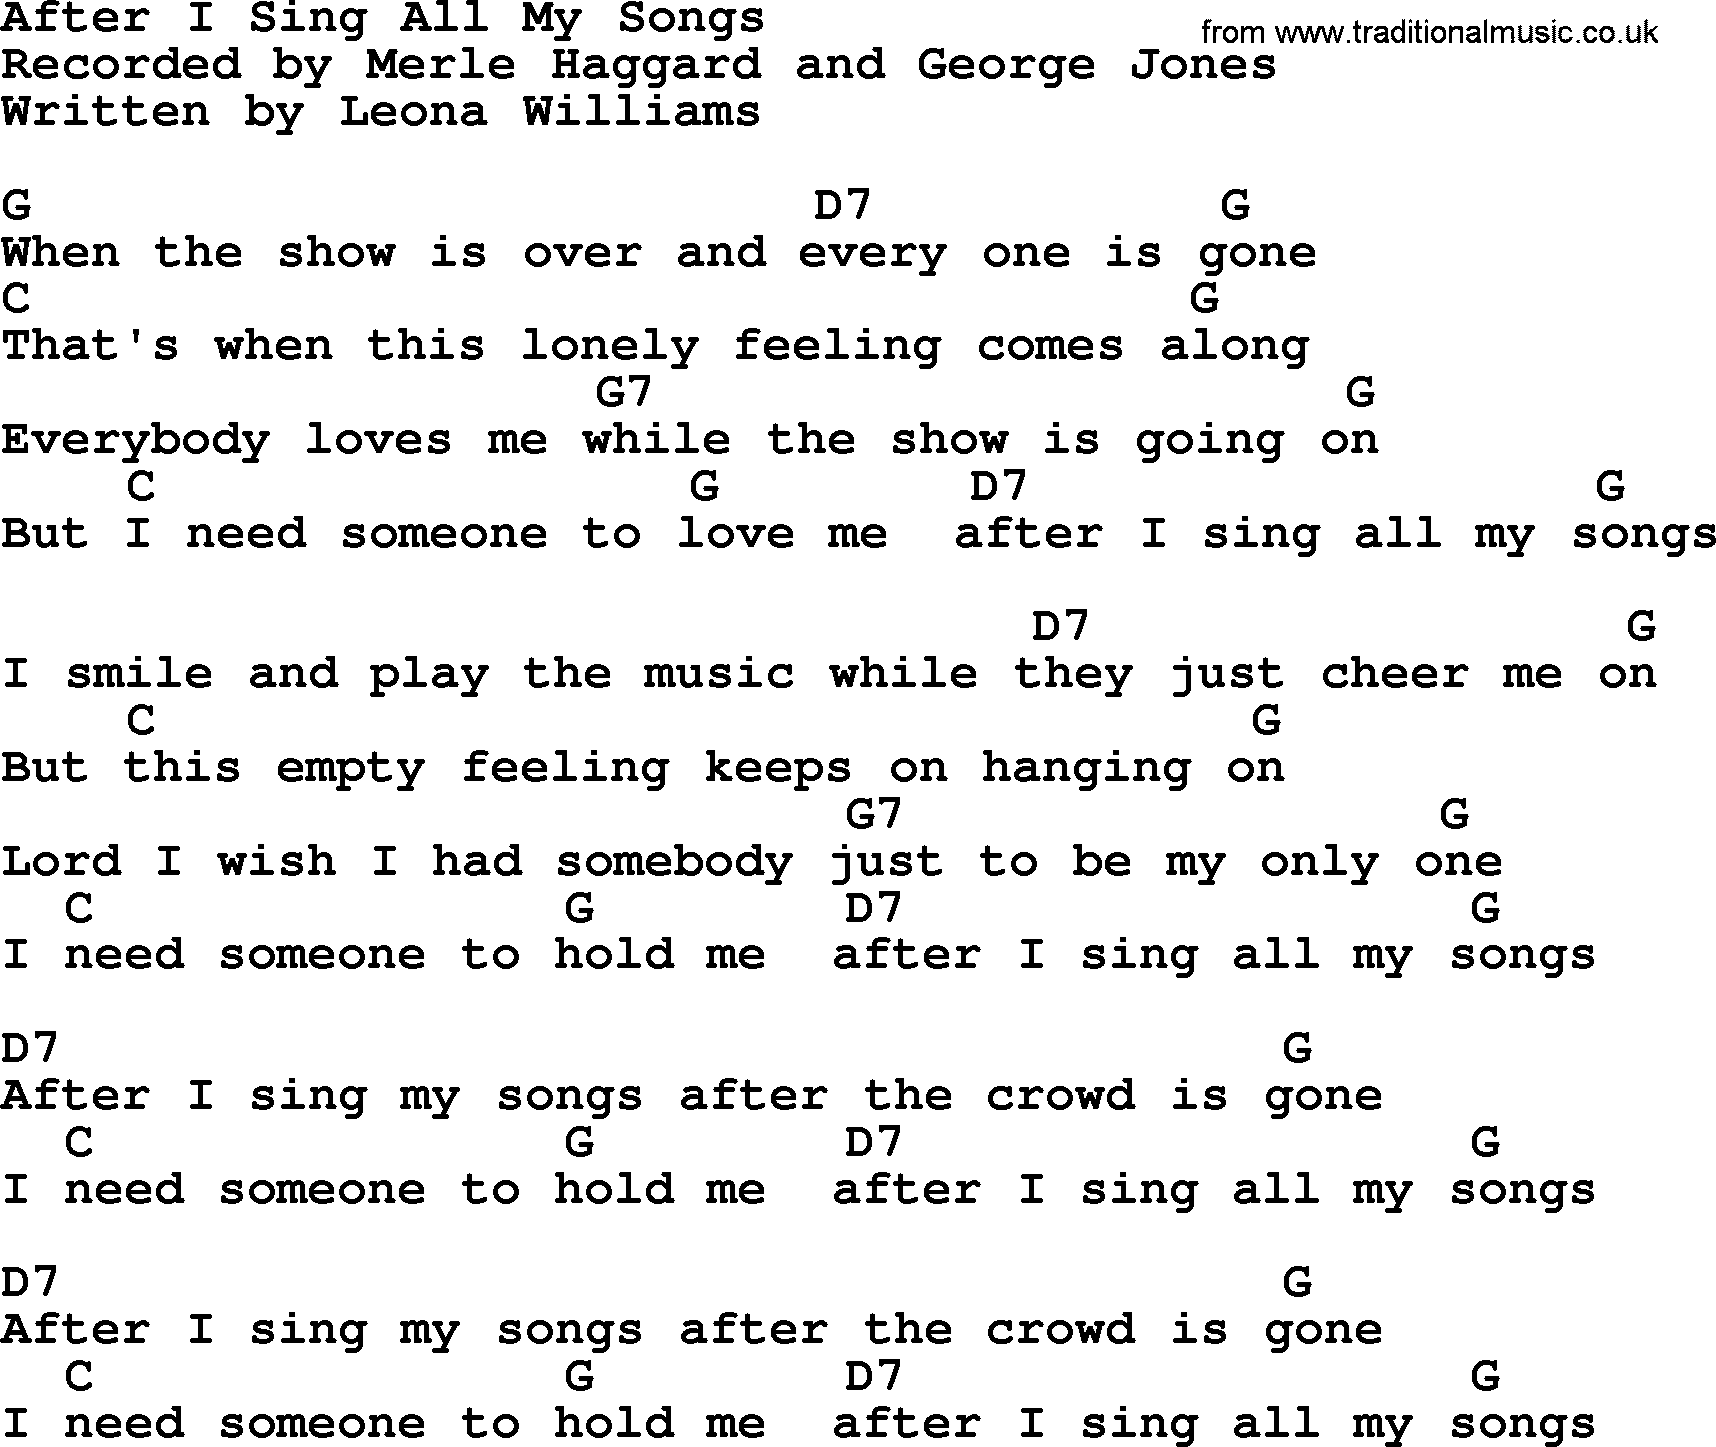 George Jones song: After I Sing All My Songs, lyrics and chords